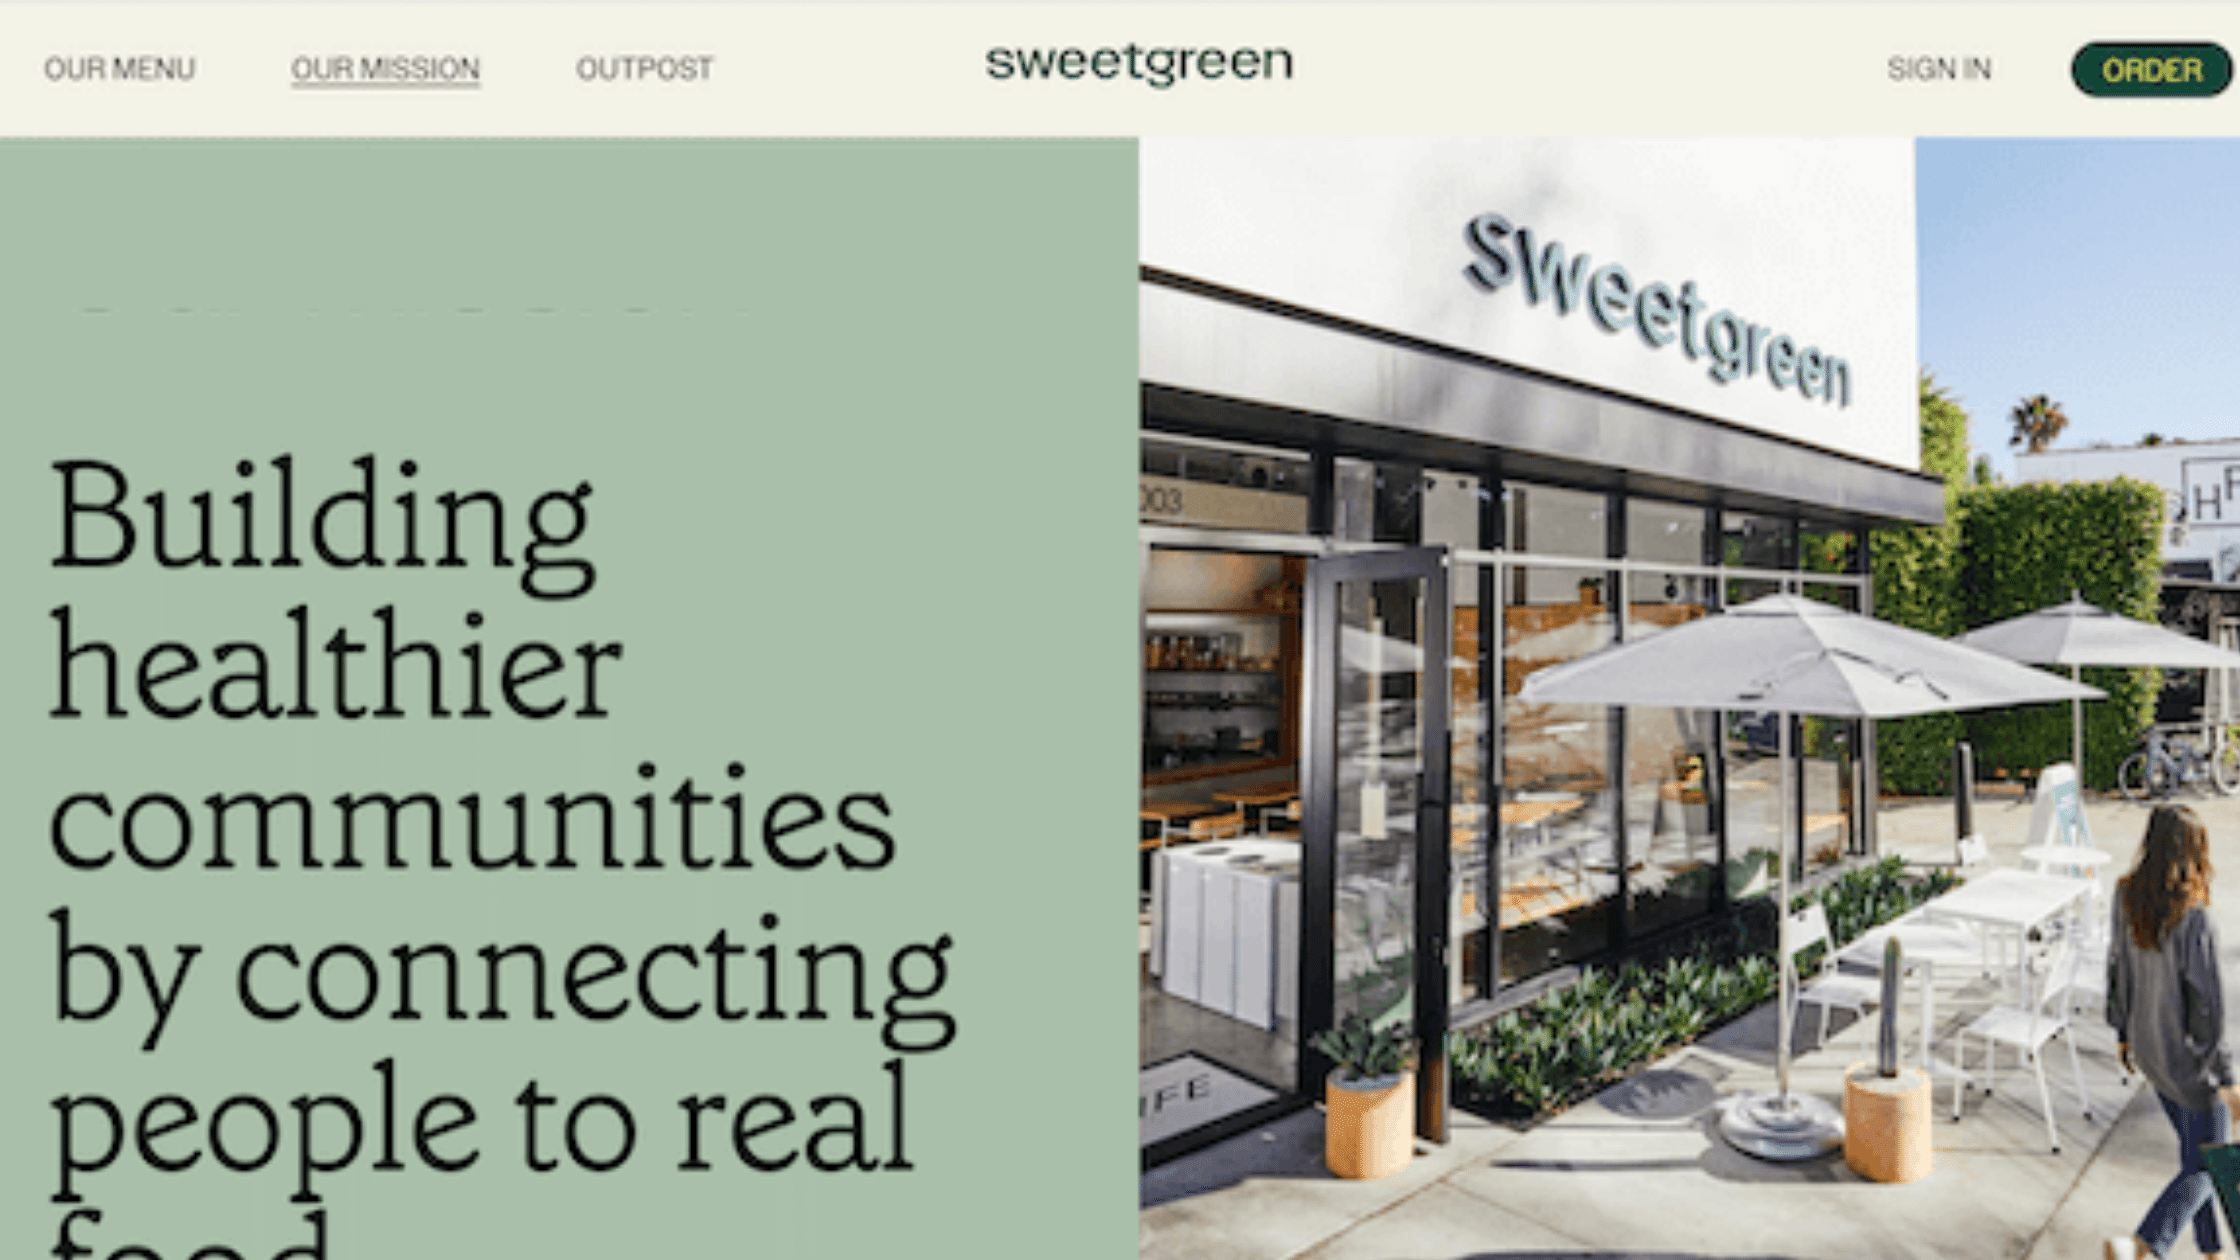 how-to-market-a-restaurant-sweetgreen-mission-statement